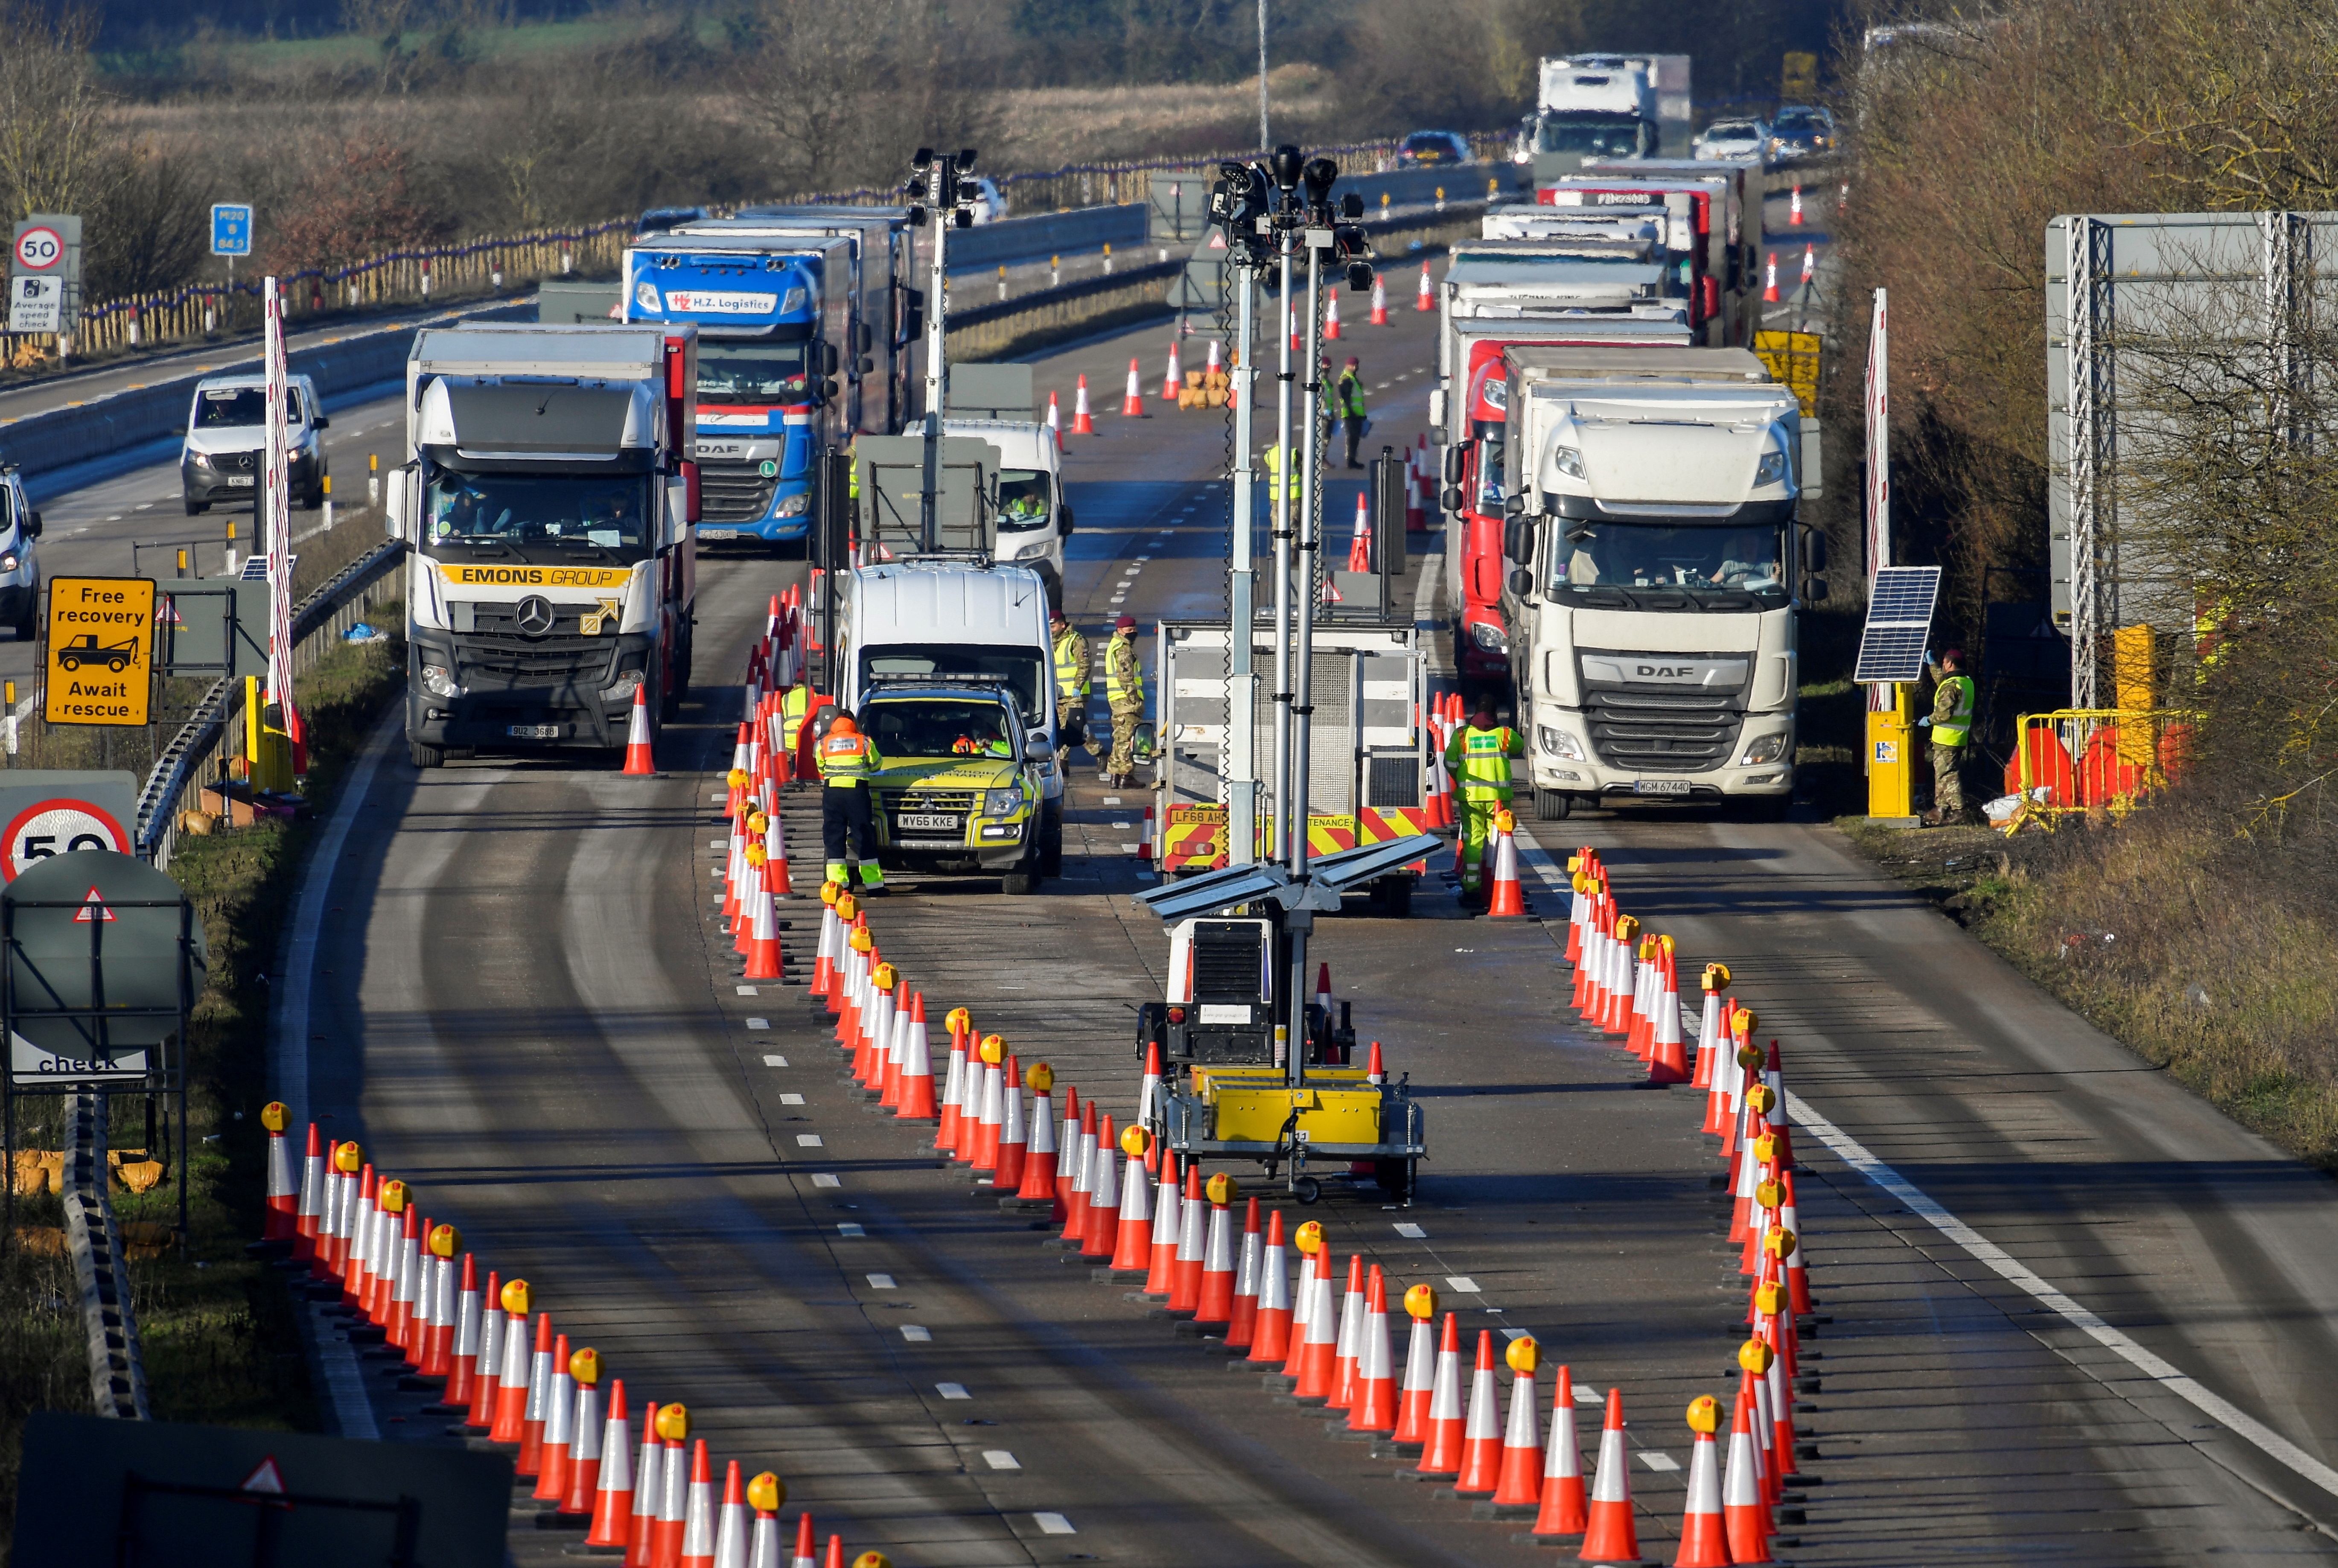 Freight lorries are stopped to undergo checks on the M20 motorway as they head towards the Eurotunnel and Port of Dover, bound for France, Ashford, Britain, December 31, 2020. REUTERS/Toby Melville